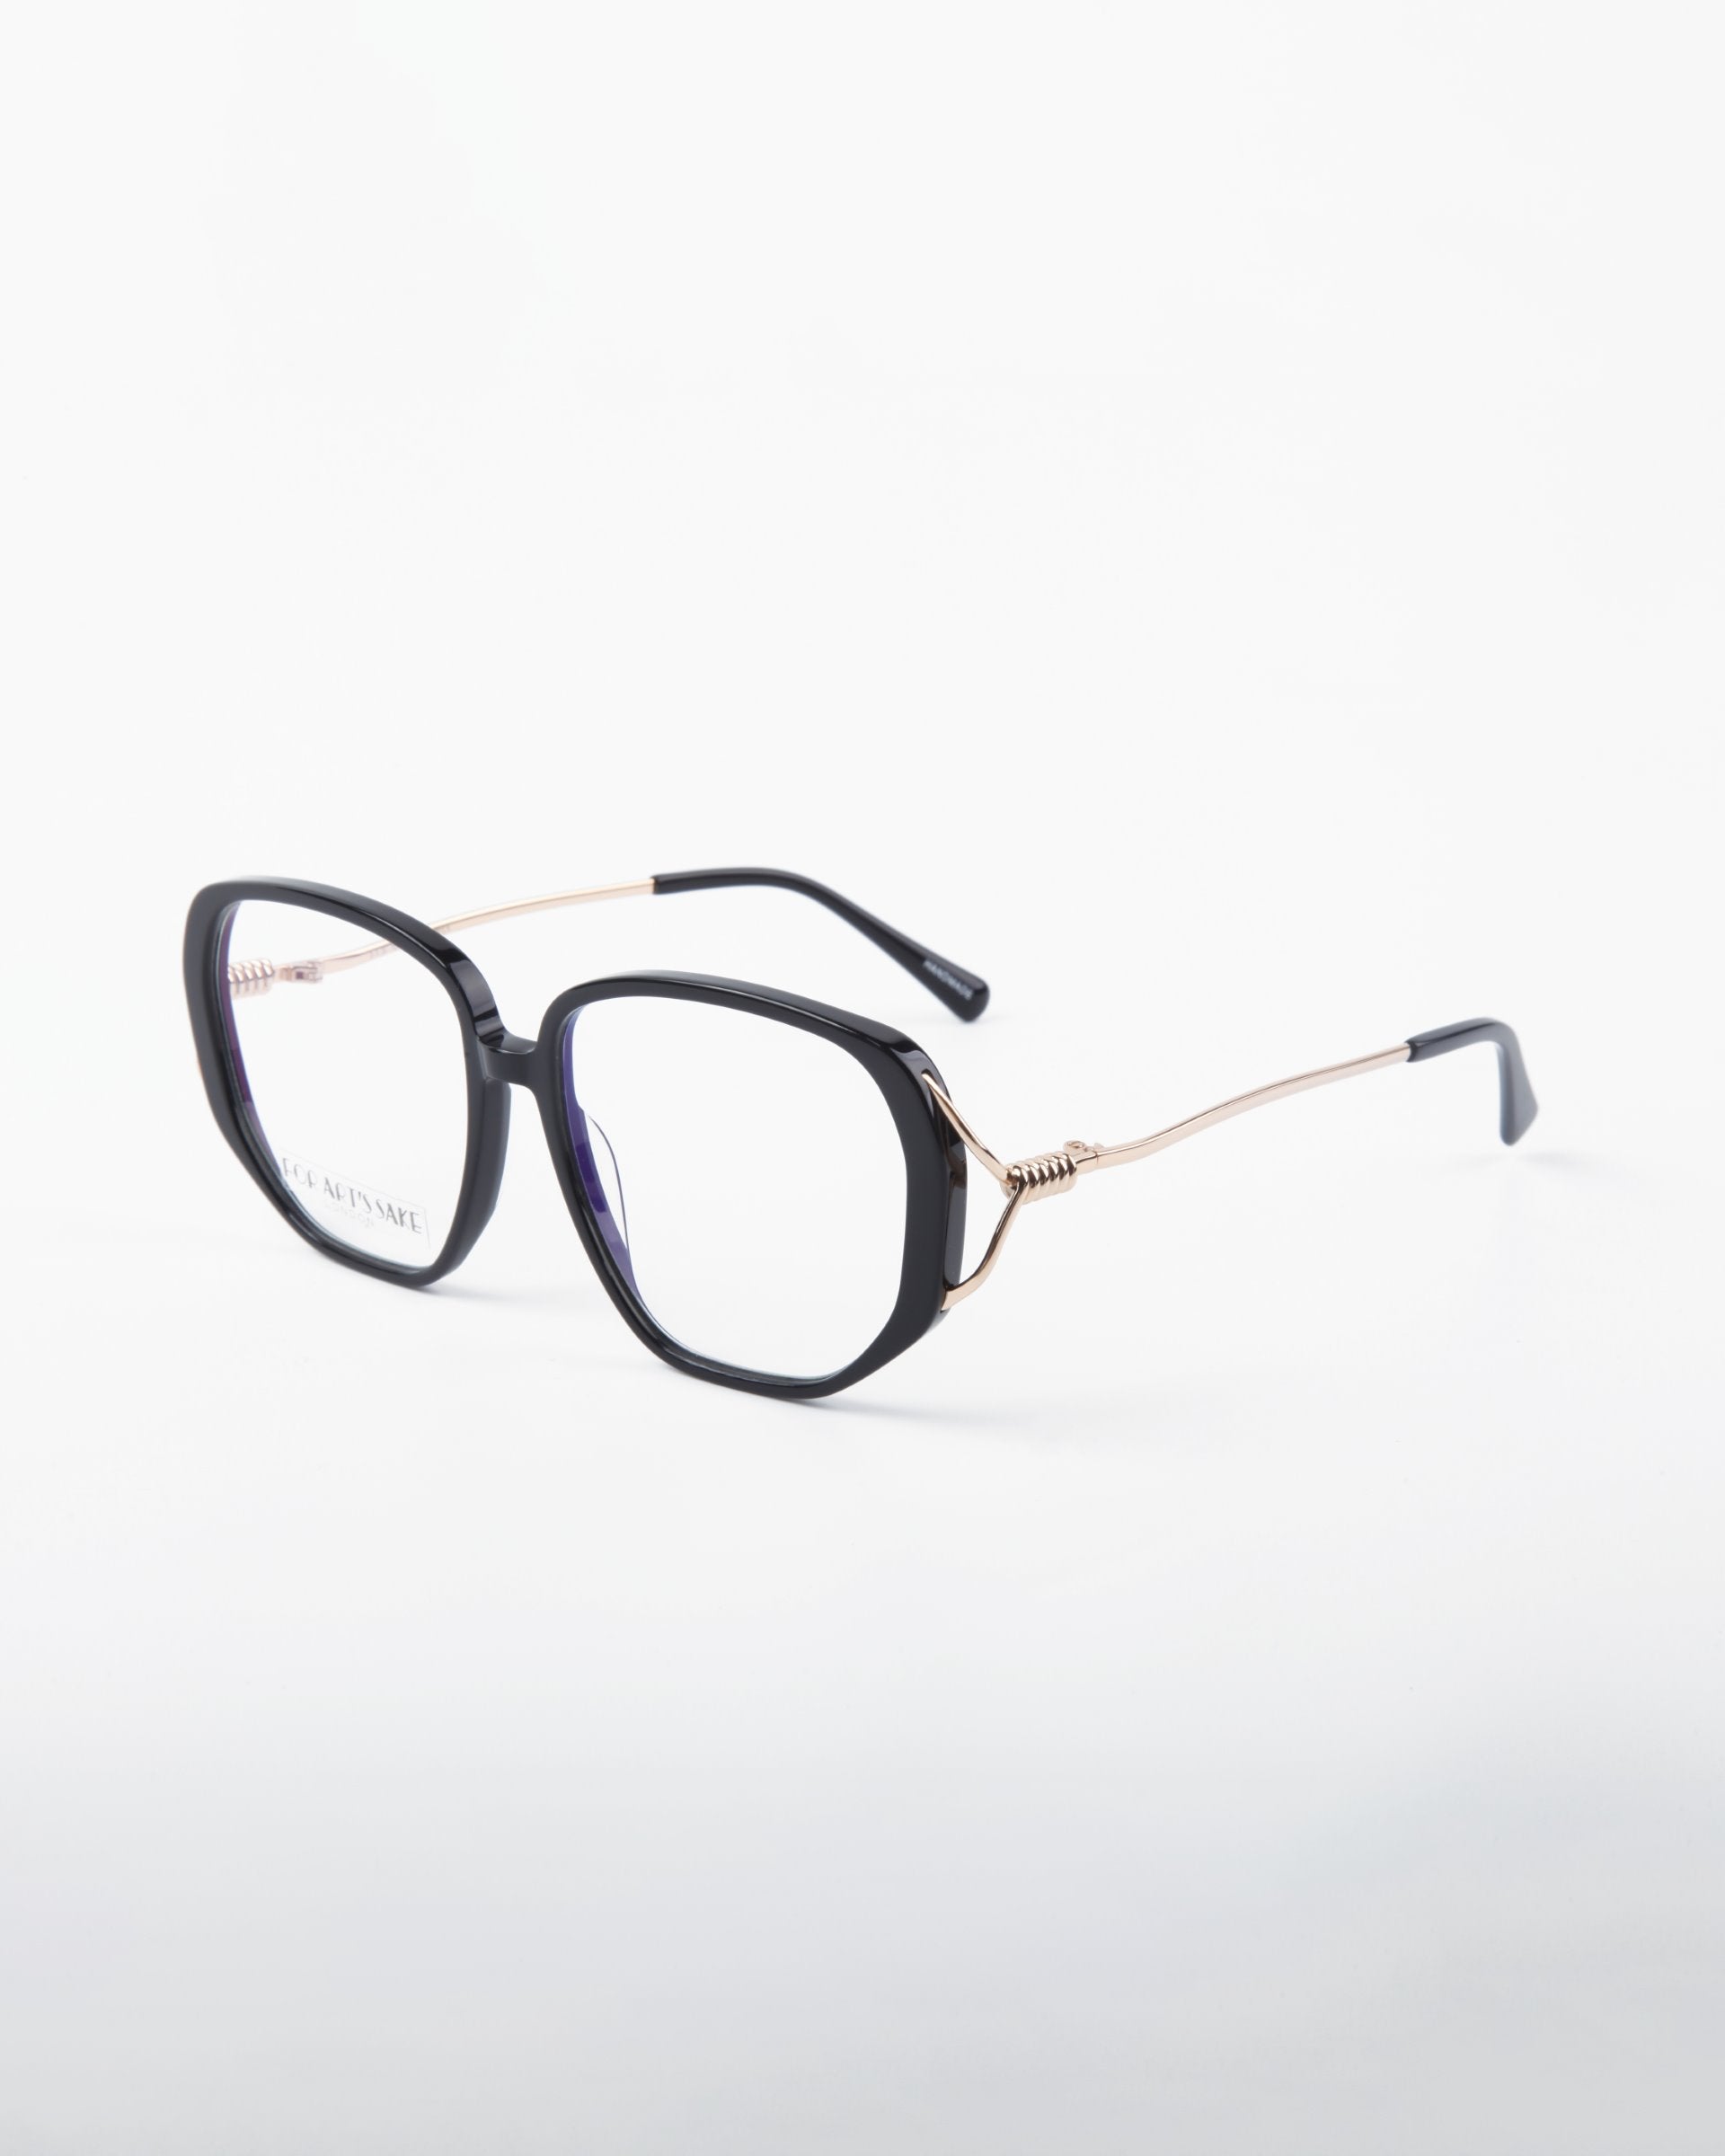 A pair of stylish For Art&#39;s Sake® Remix prescription eyeglasses with large black square frames and thin gold arms. The arms are decorated with a small coil detail near the hinges, and the glasses have transparent lenses with UV protection. The background is white.